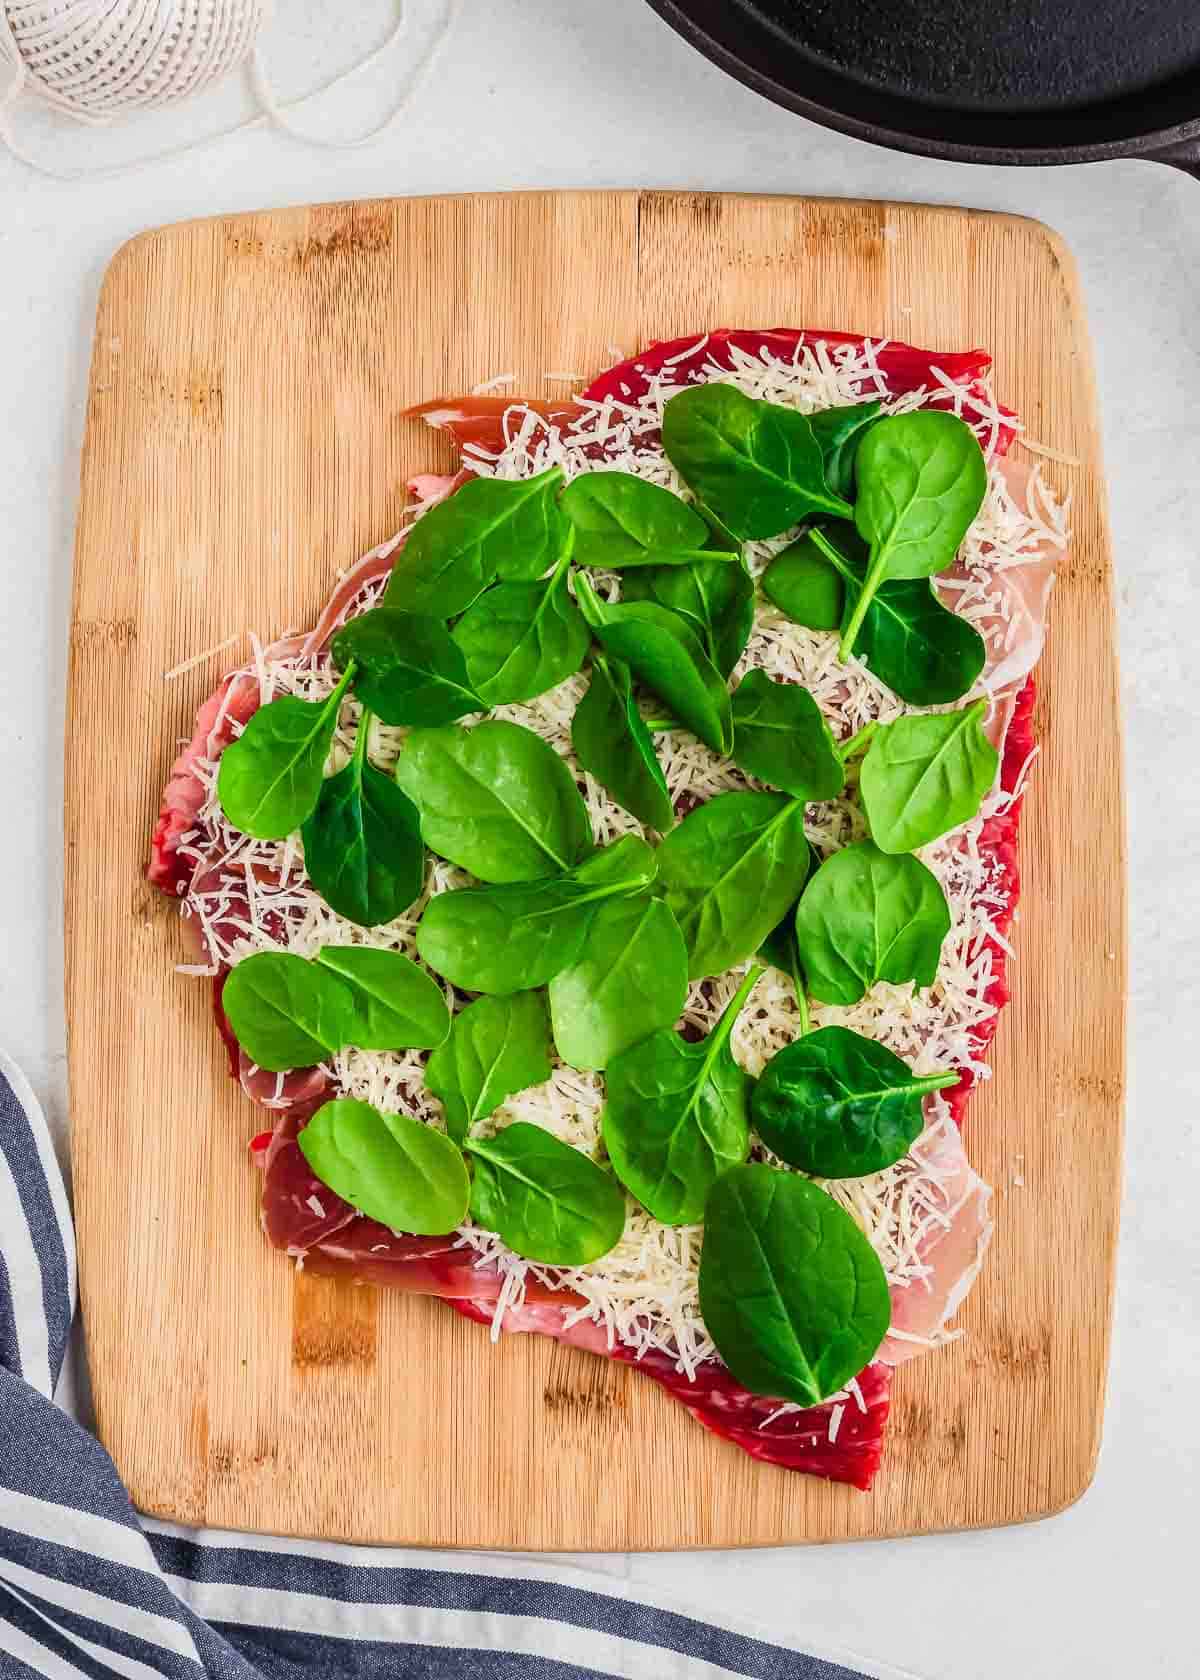 Thinly pounded flank steak on a cutting board topped with pesto, prosciutto, parmesan and baby spinach.